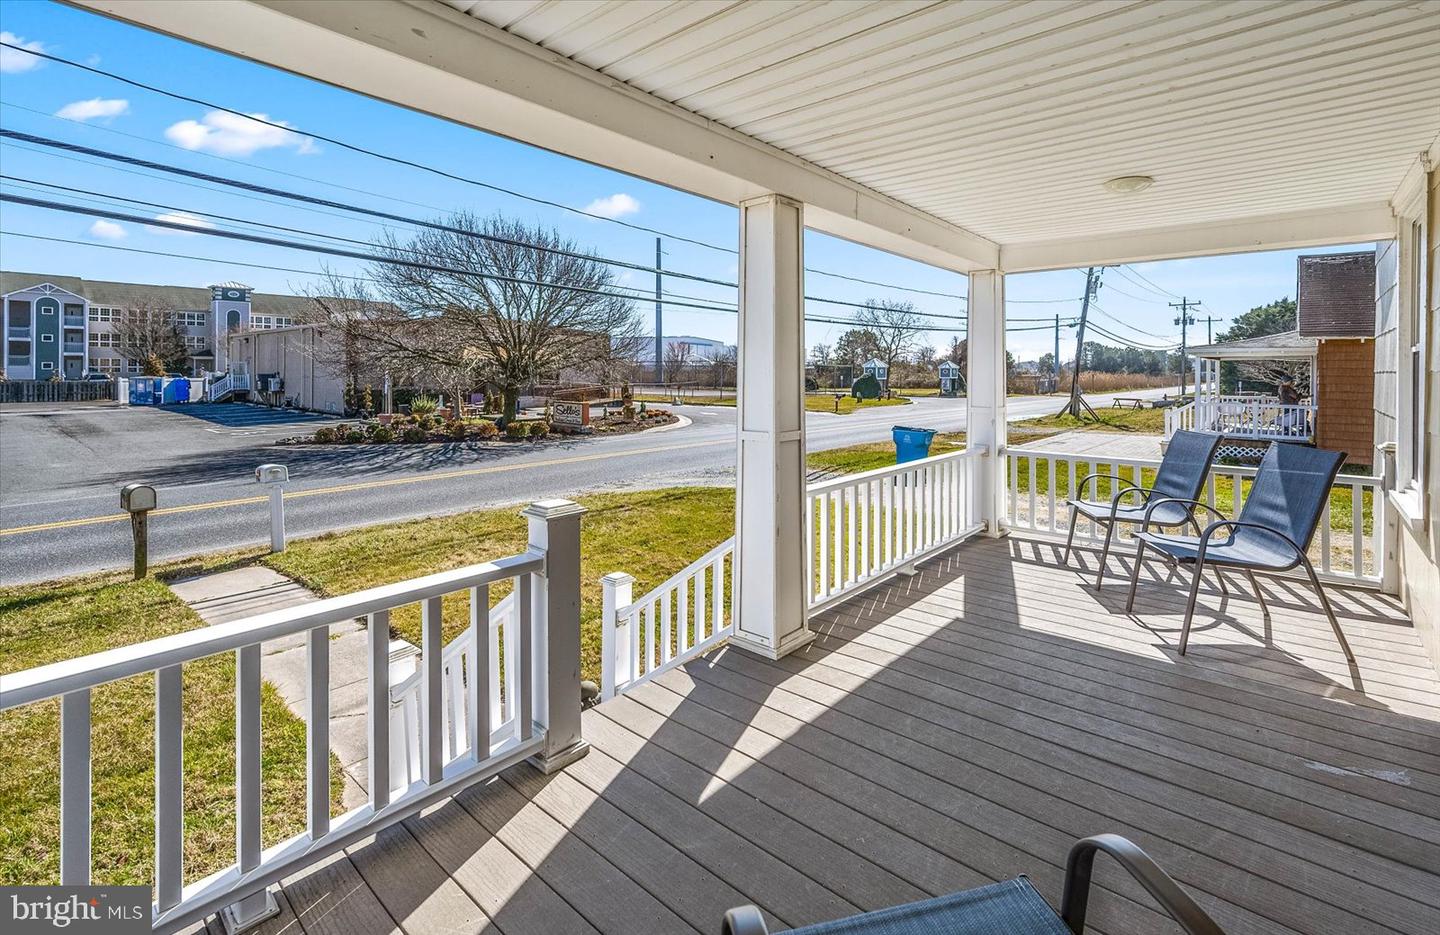 MDWO2019110-802902594320-2024-03-05-14-03-41 9801/9805 Golf Course Rd | Ocean City, MD Real Estate For Sale | MLS# Mdwo2019110  - 1st Choice Properties